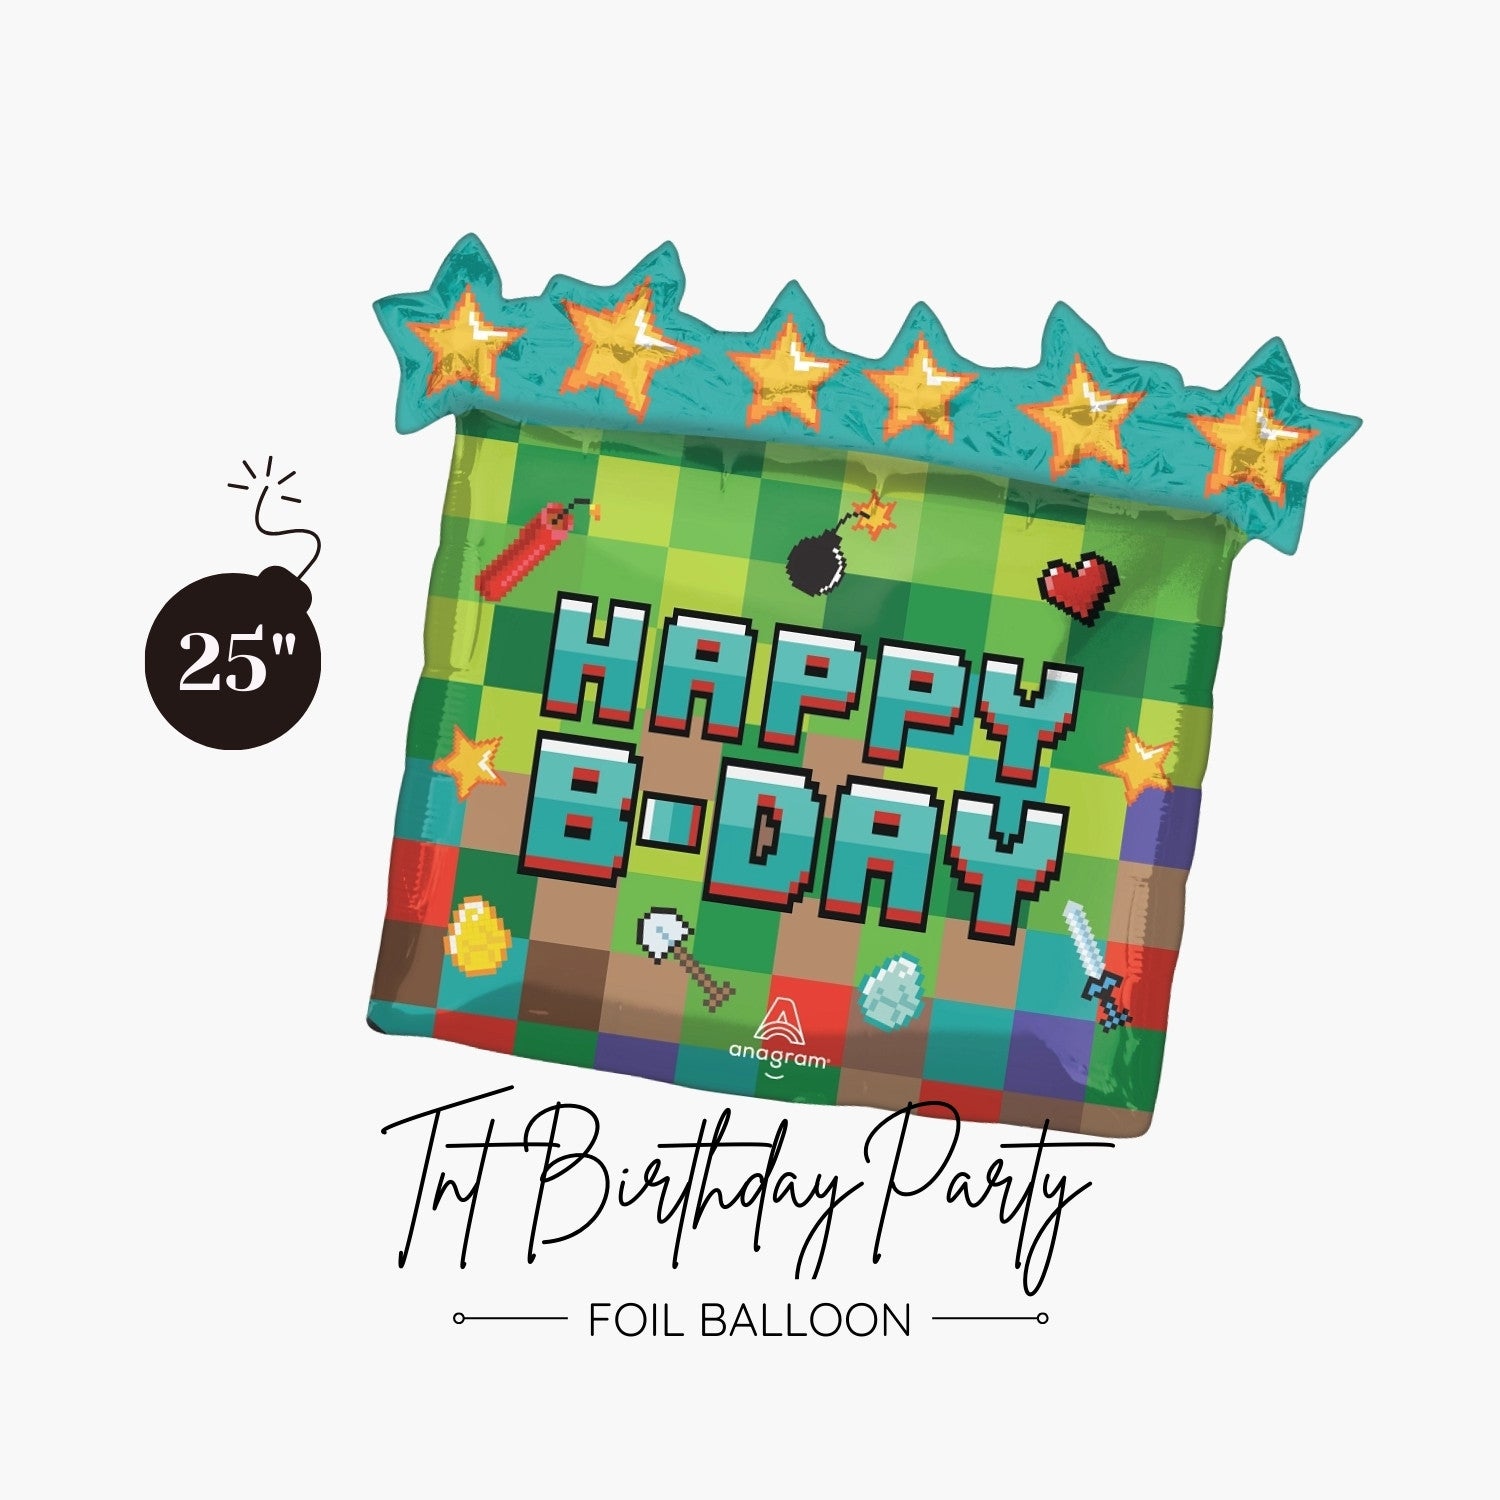 Tnt Birthday Party Pixel Foil Balloon 25" - Epic Pixel Video Game Party Decoration